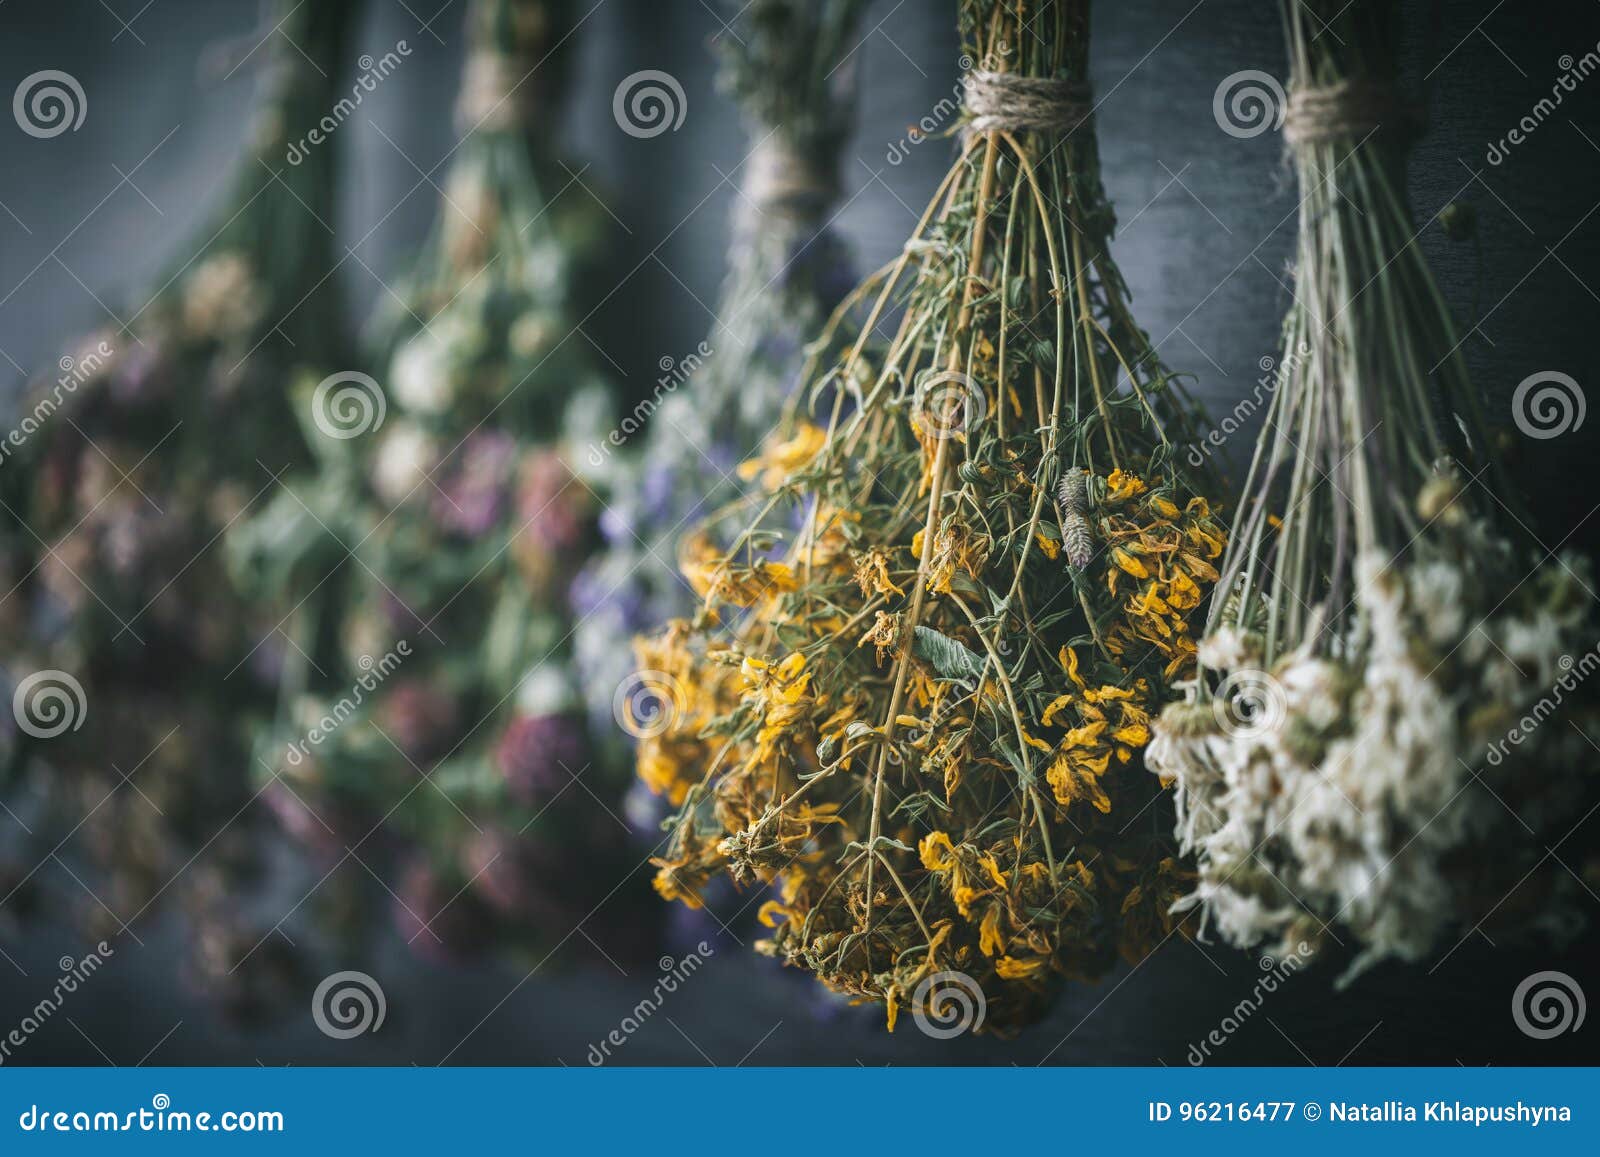 hanging bunches of medicinal herbs, focus on hypericum flower.